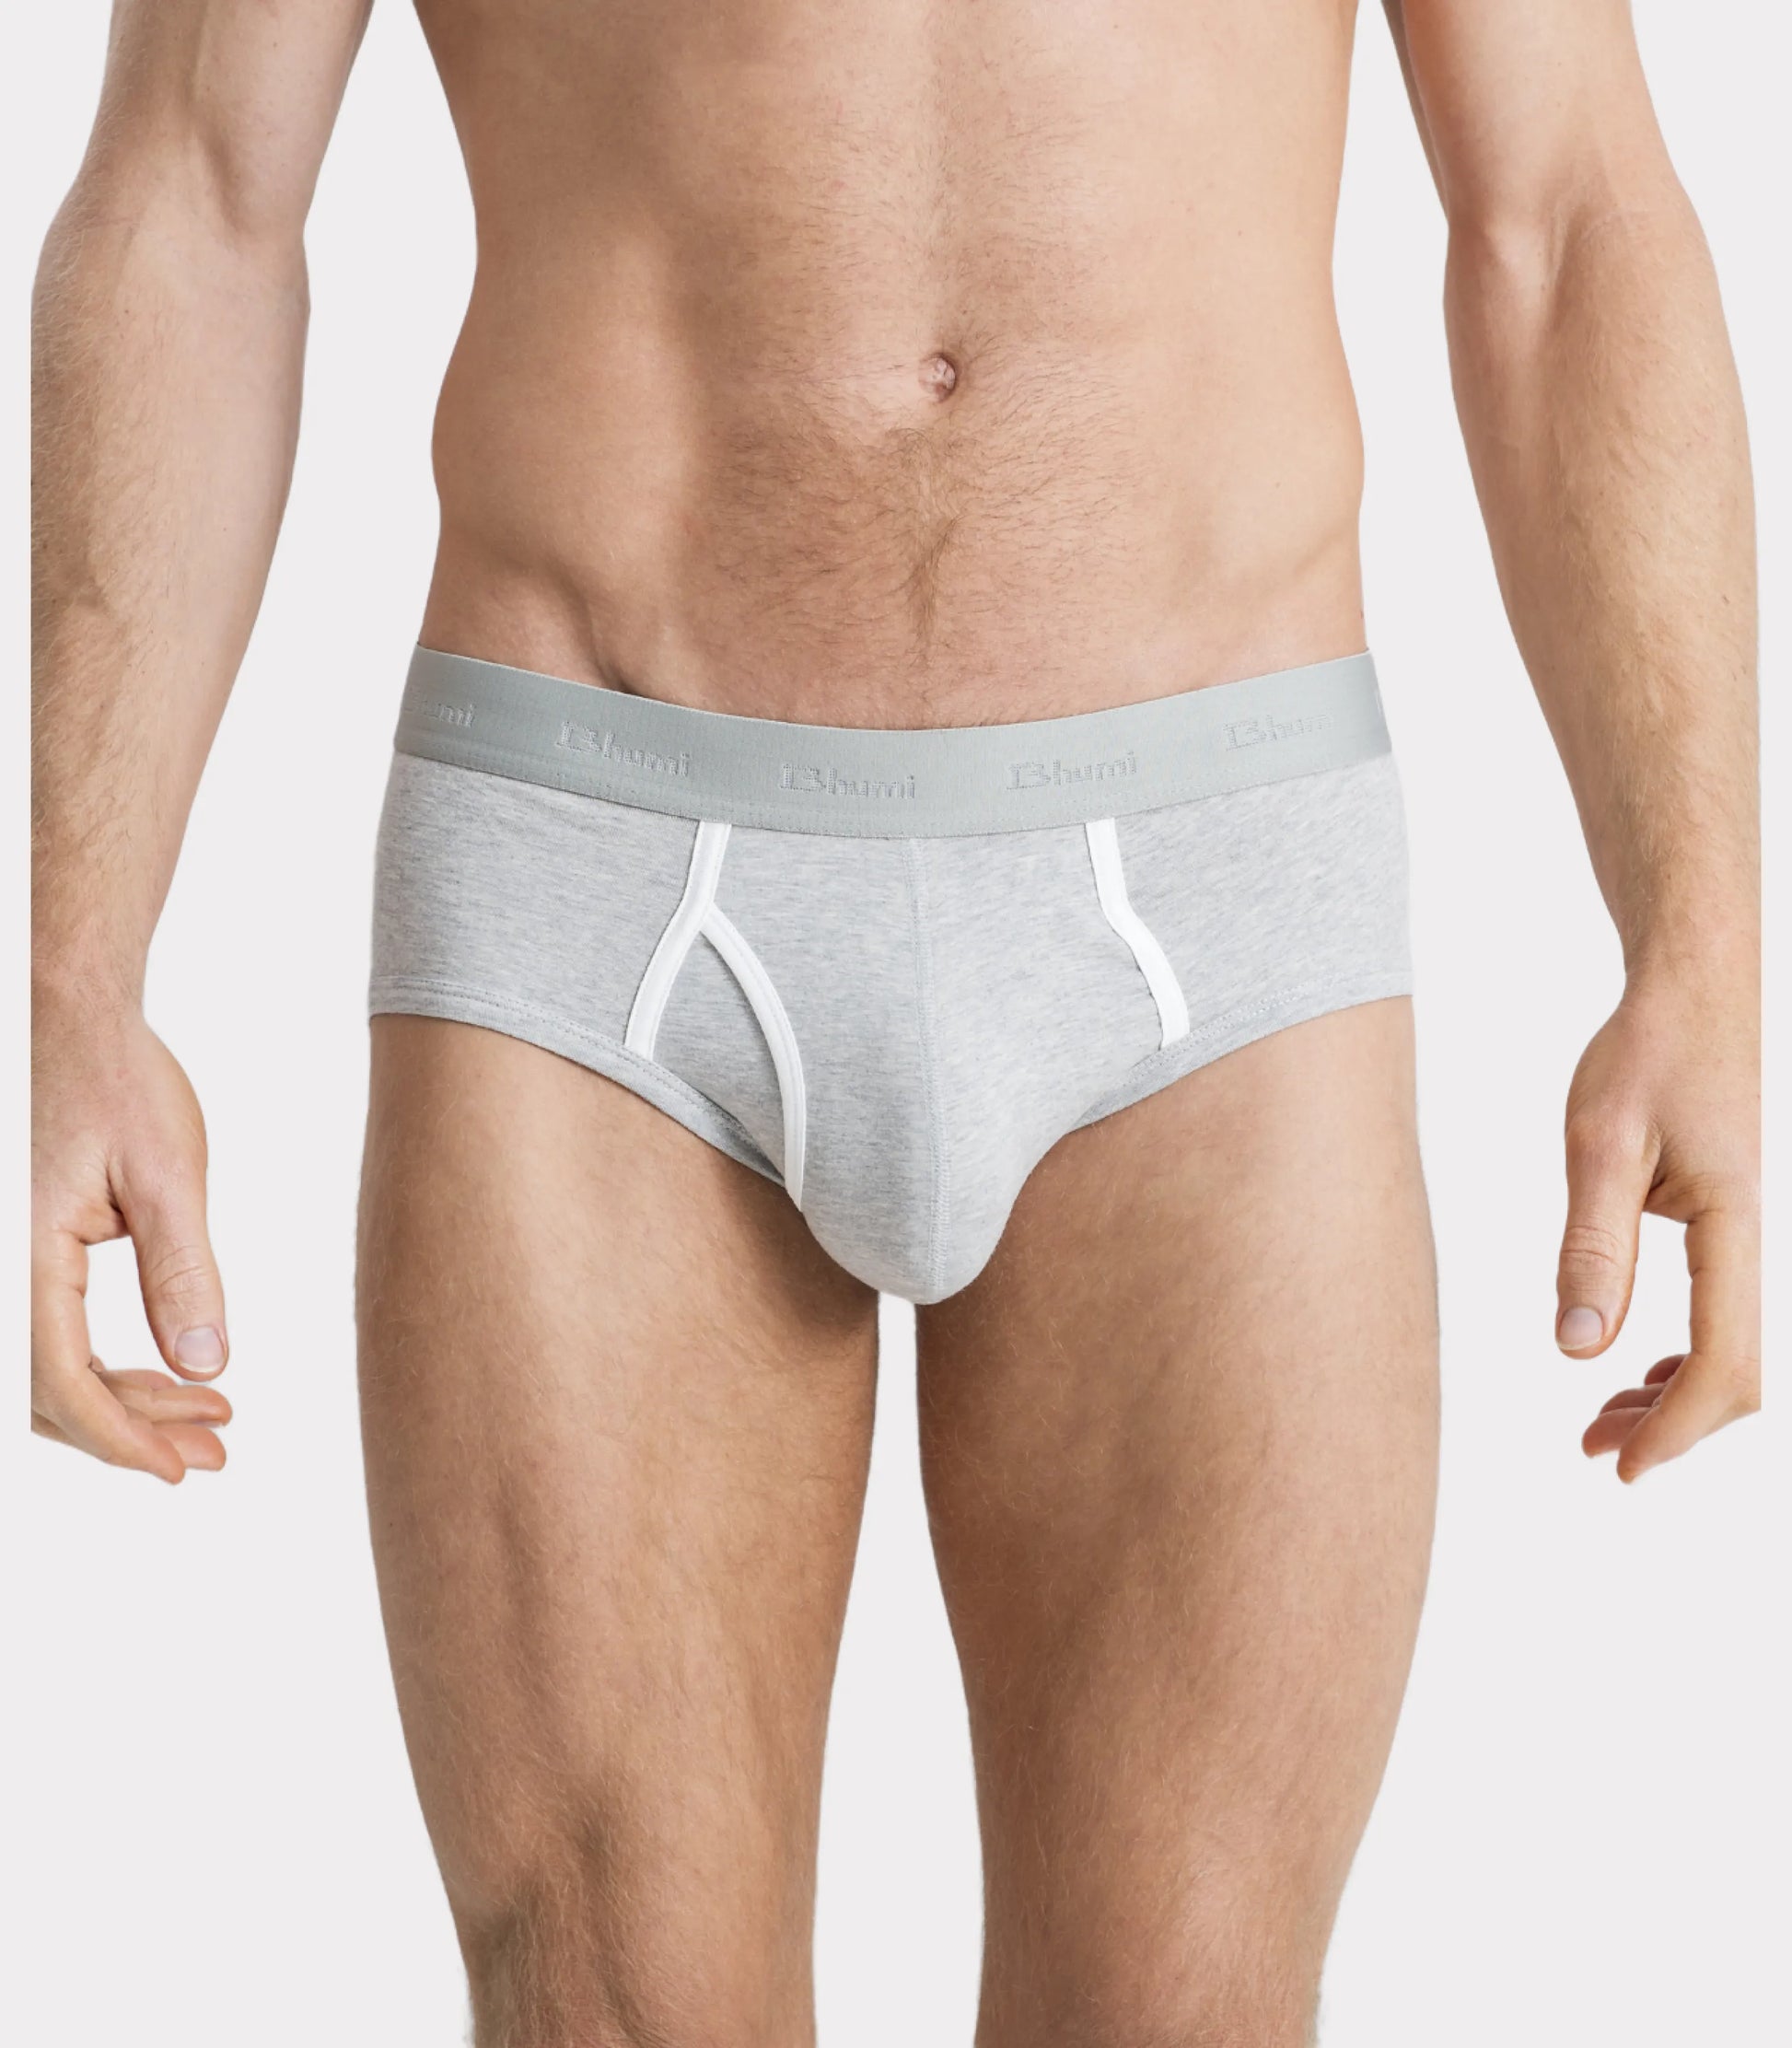 Essentials Underwear Packs Are a Favorite of Shoppers